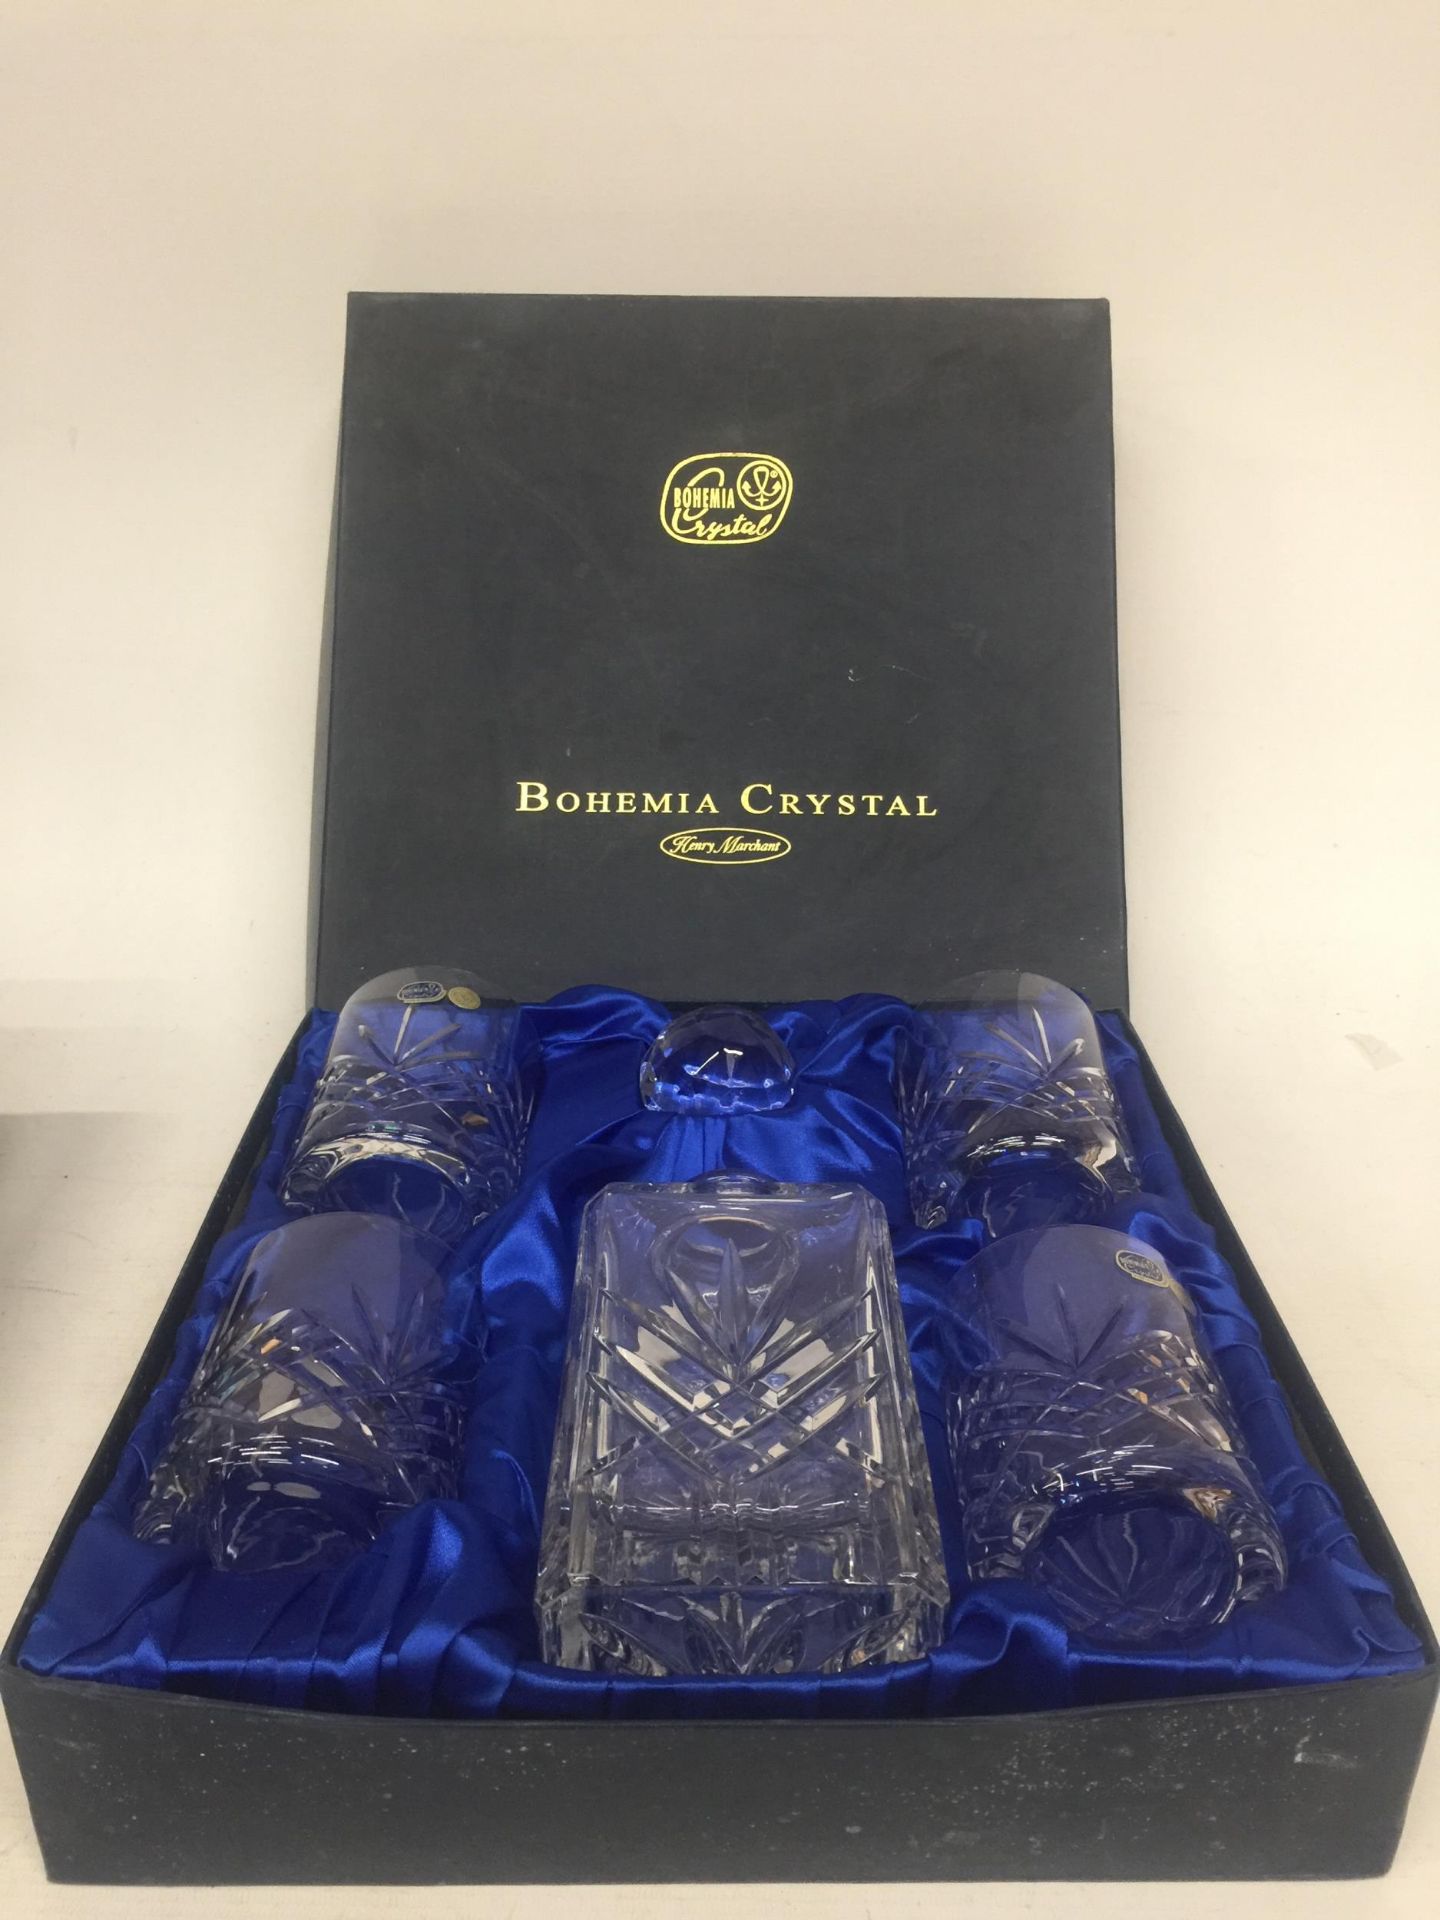 A BOHEMIA CRYSTAL DECANTER WITH FOUR WHISKY TUMBLERS IN A PRESENTATION BOX